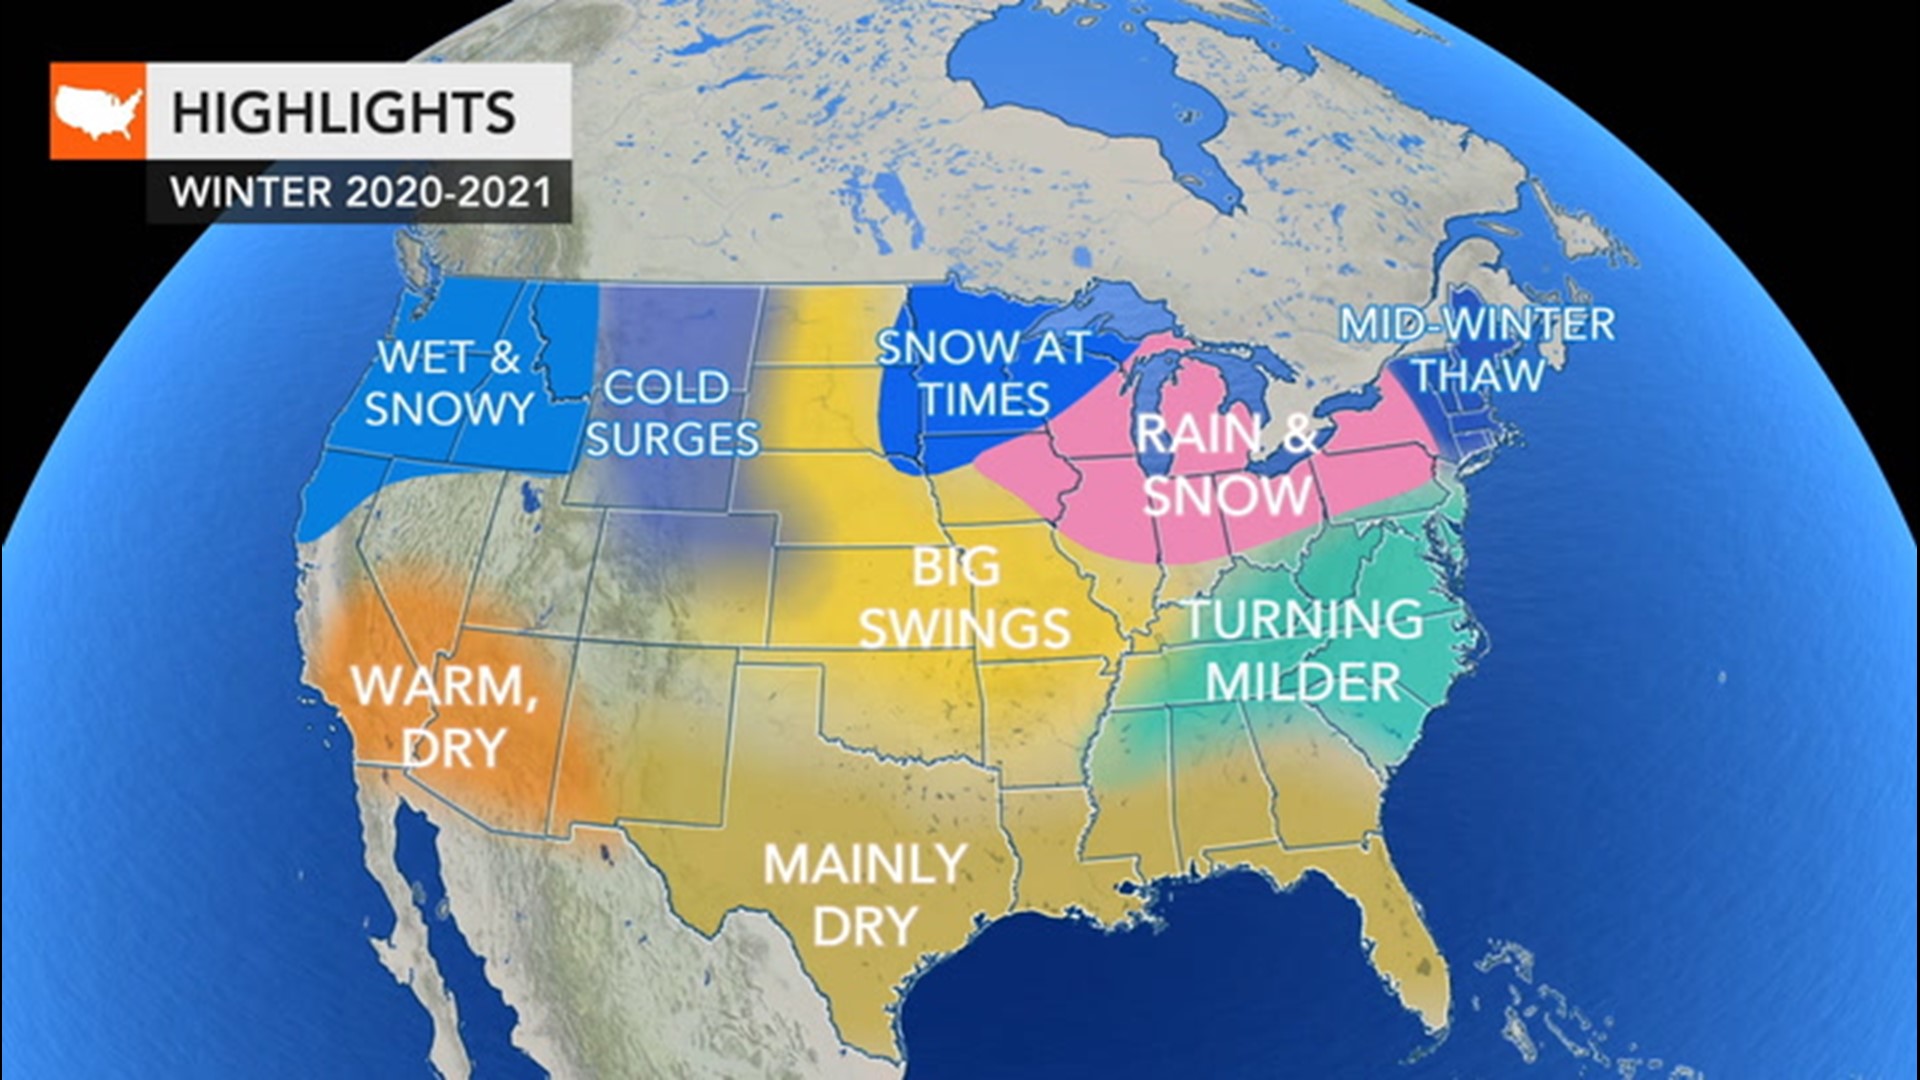 Winter is coming; here's the winter weather forecast for around the